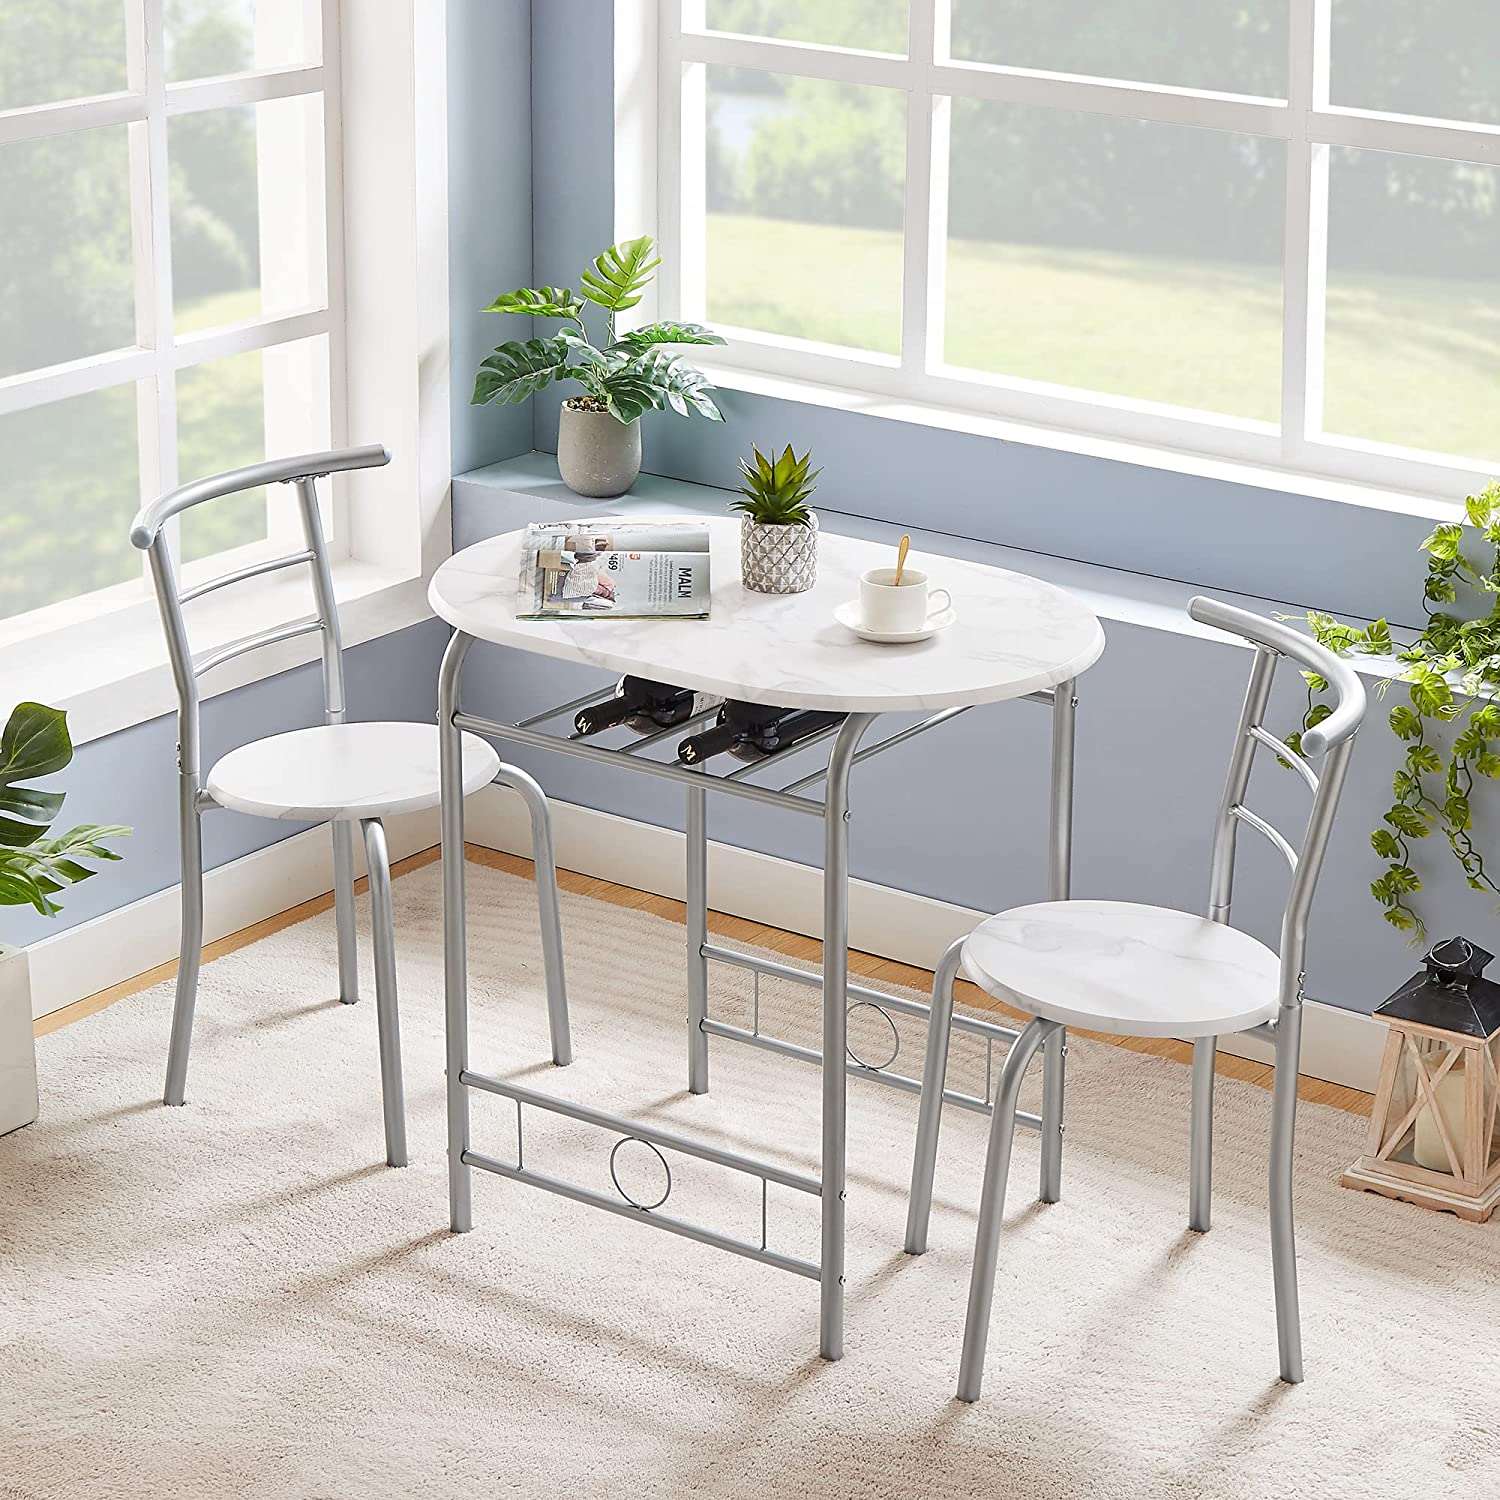 VECELO 3-Piece Dining Table Set/Round Tabletop & Chair for Kitchen